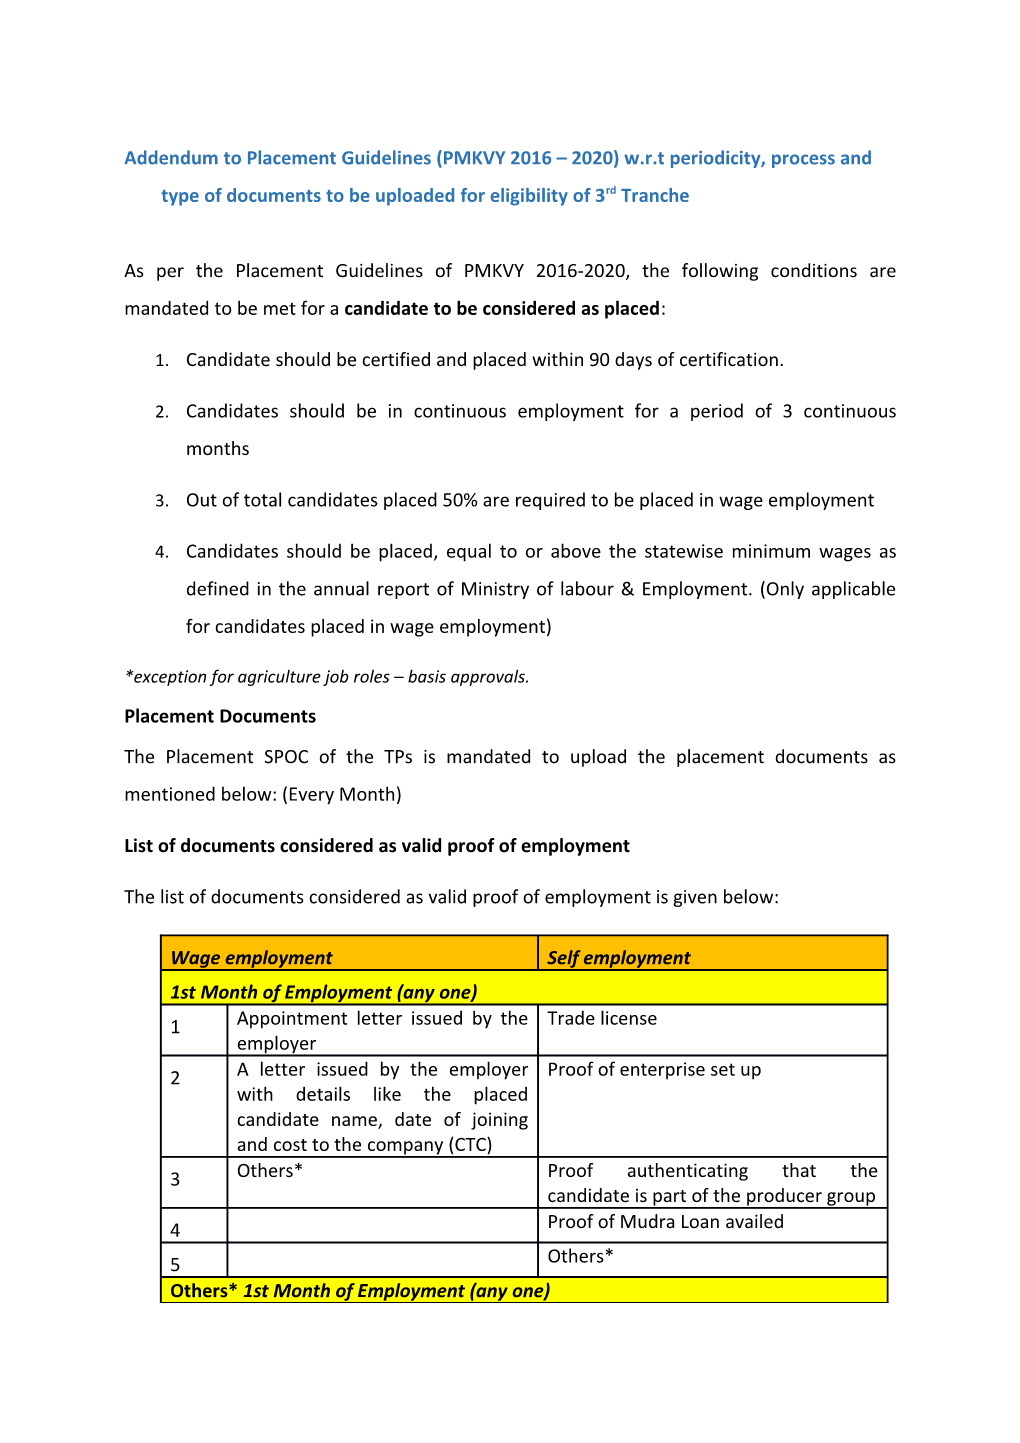 Addendum to Placement Guidelines (PMKVY 2016 2020) W.R.T Periodicity, Process and Type